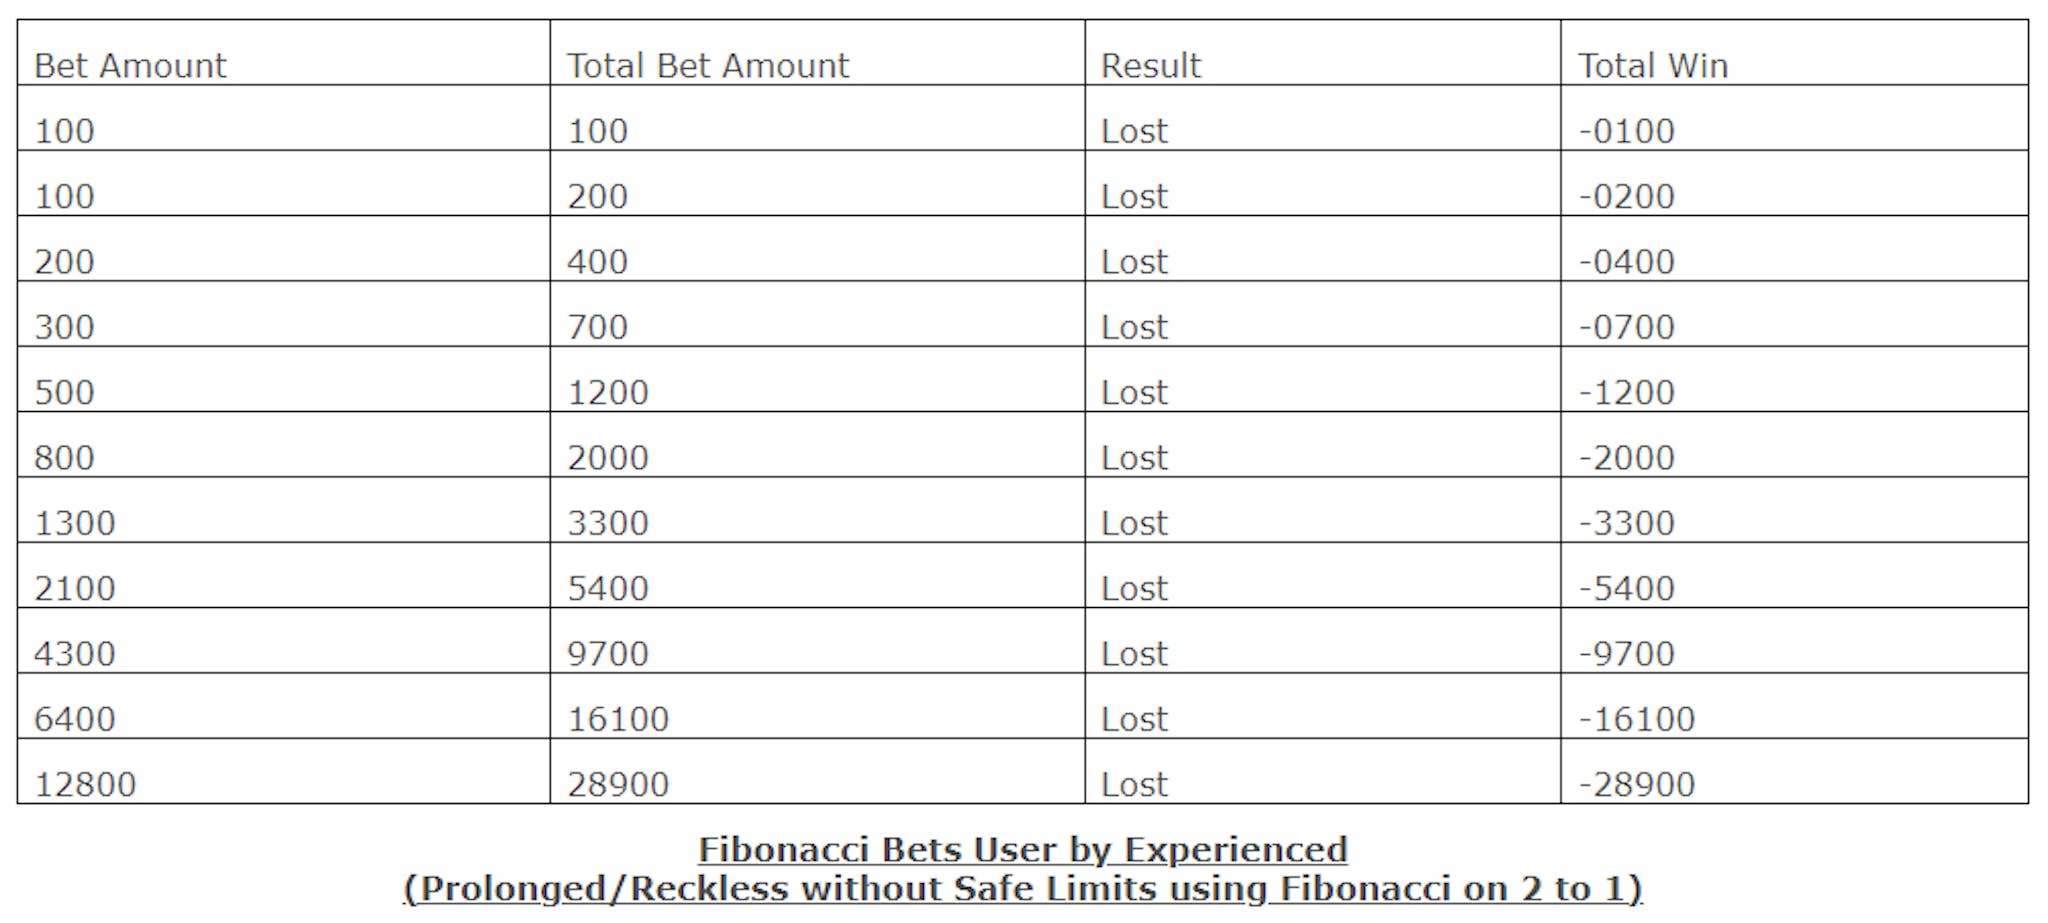 Fibonacci Bets User by Experienced(Prolonged/Reckless without Safe Limits using Fibonacci on 2 to 1)